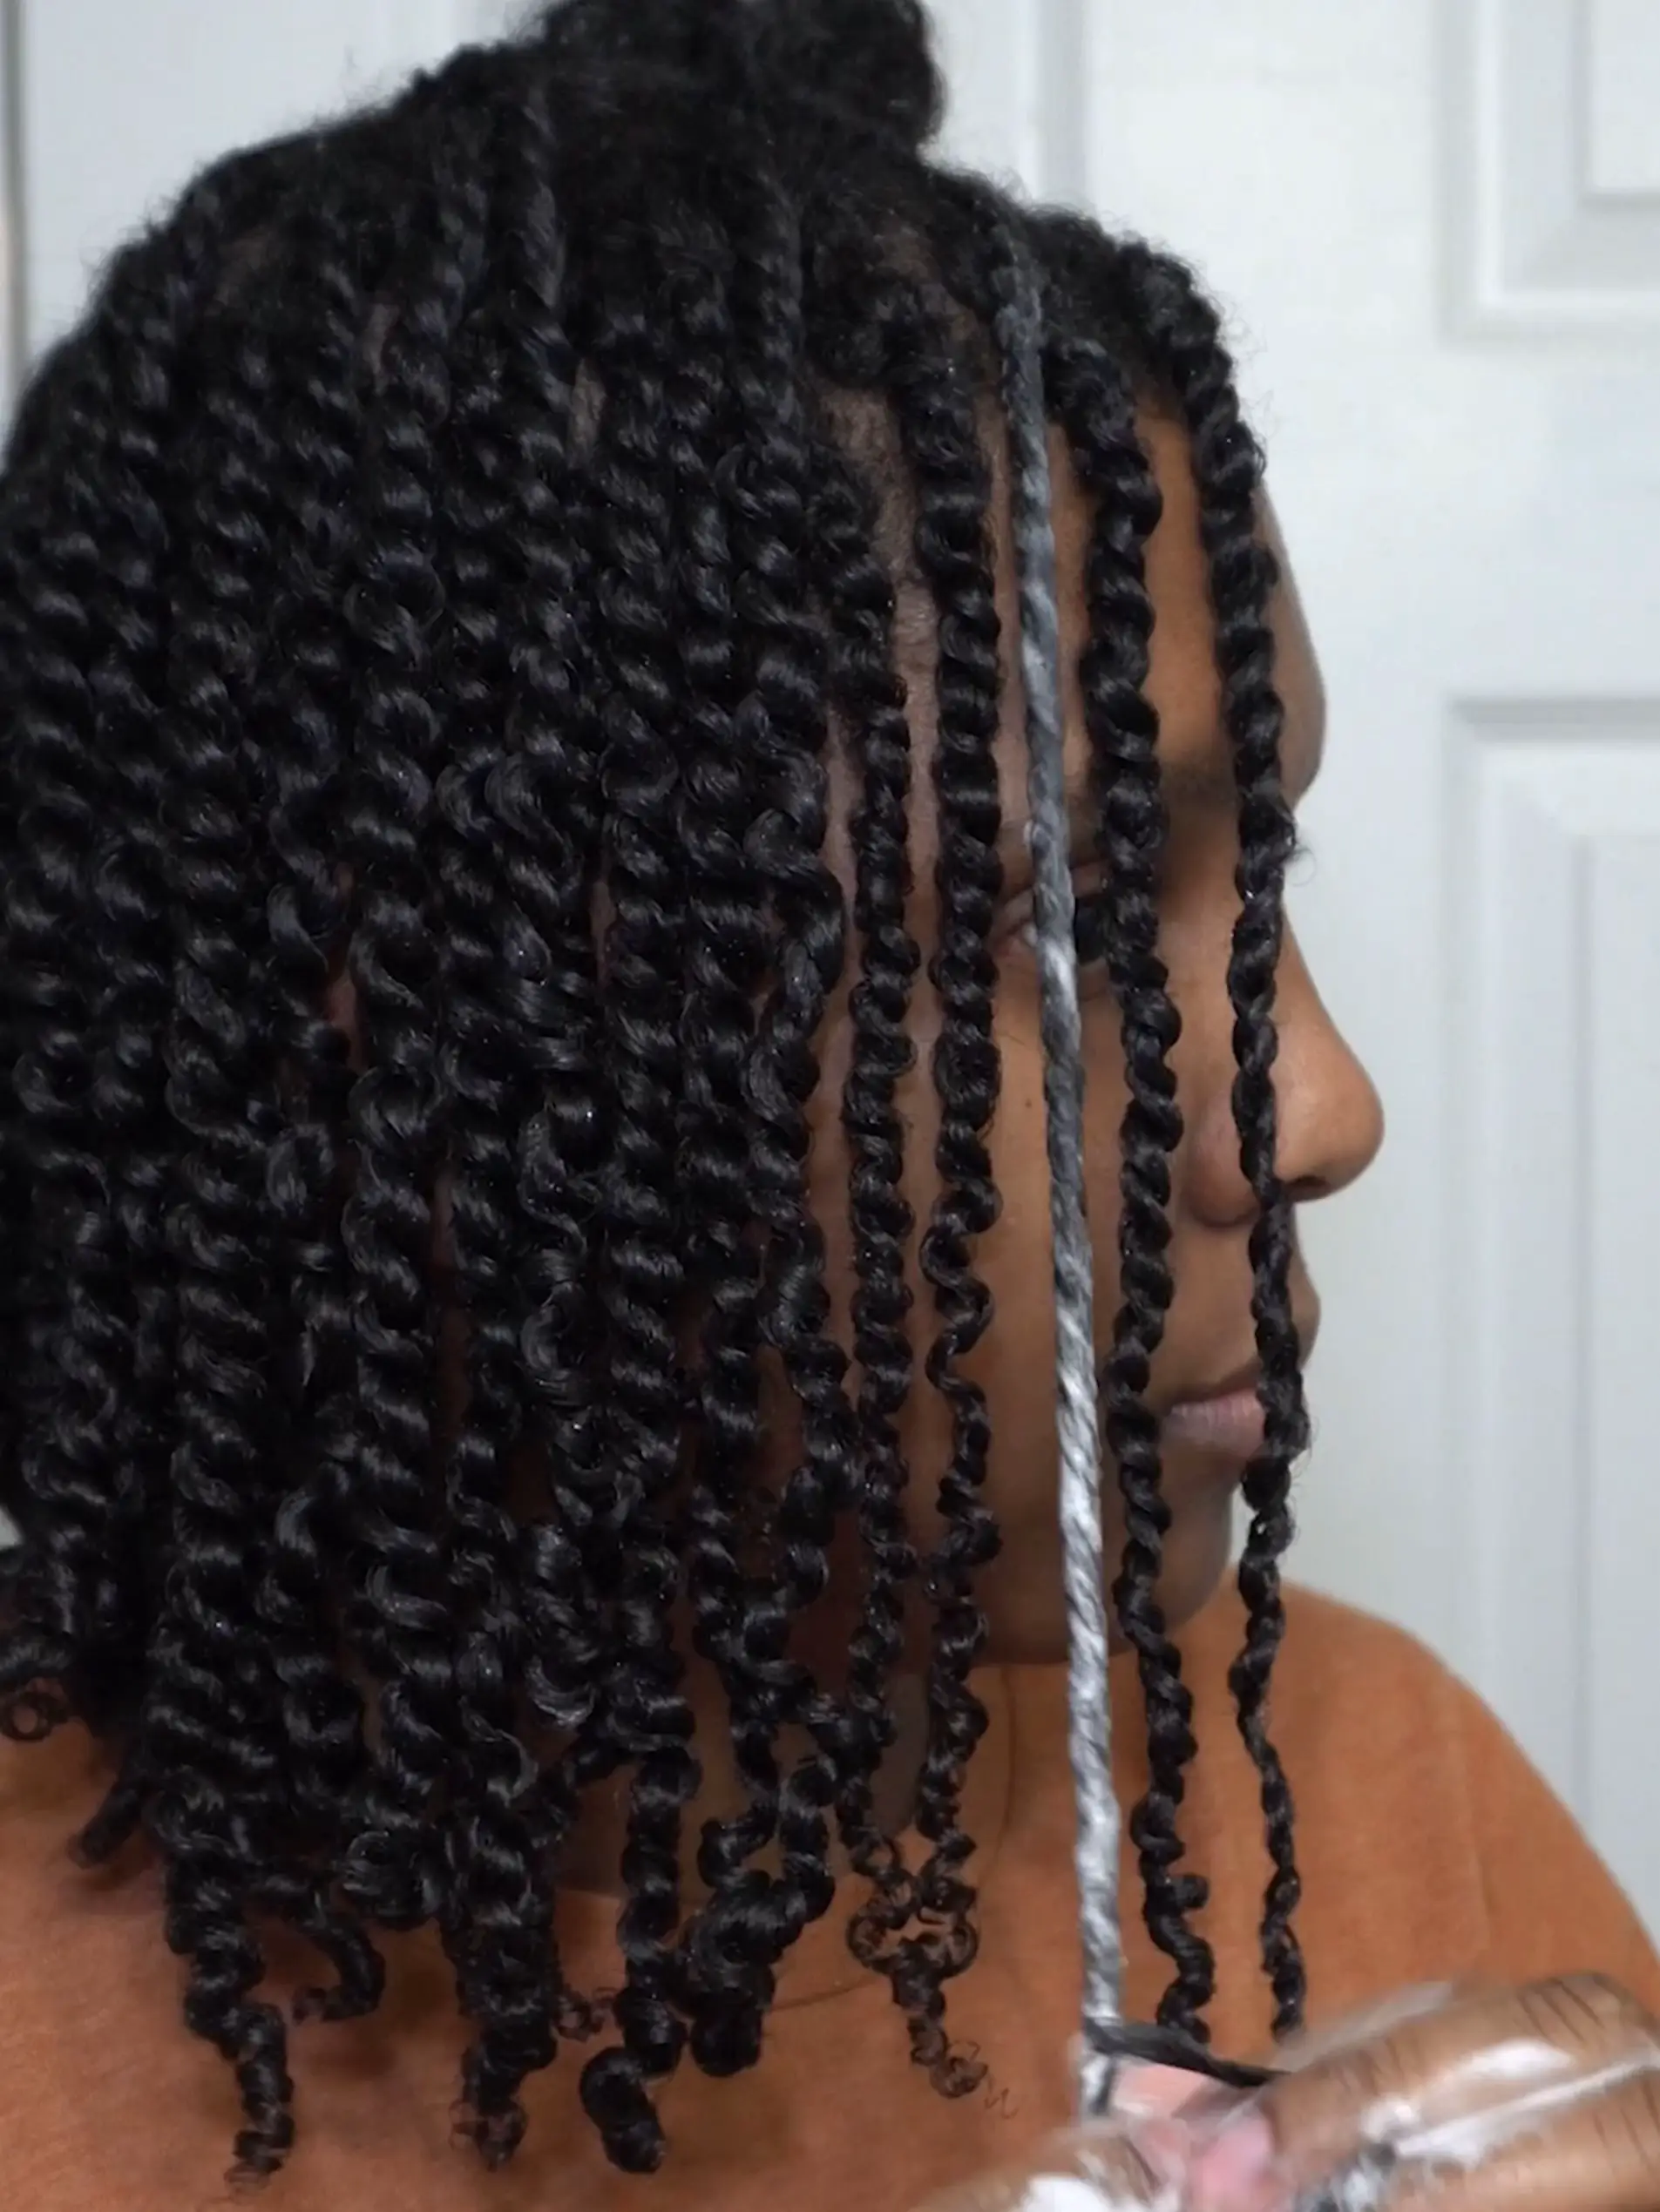 Try some mini twist hairstyles with me 🫶🏾 • I've been wanting mini t